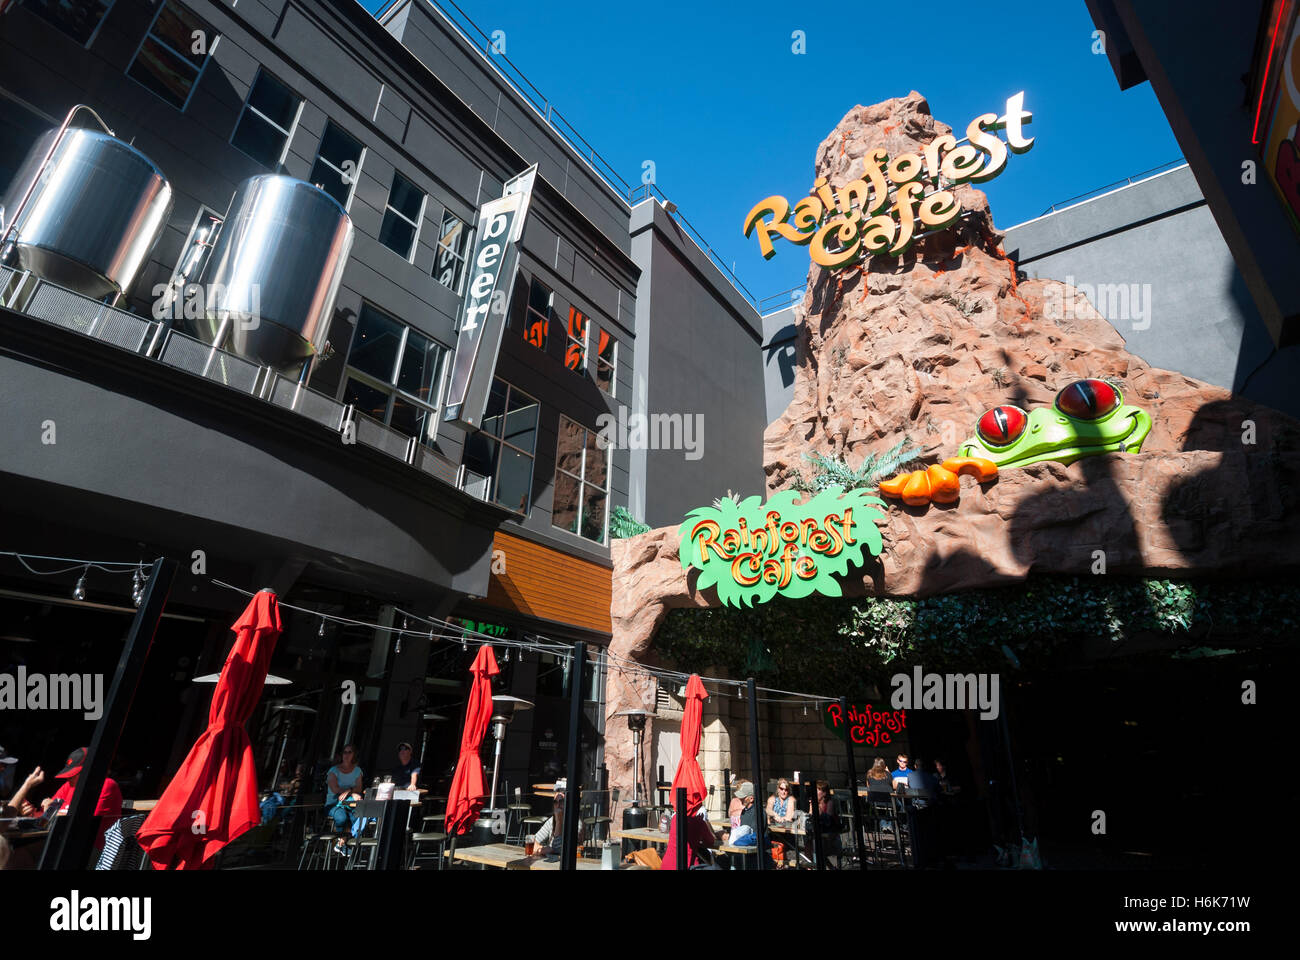 The entrance to the Rainforest Cafe  a tropical themed restaurant on Clifton Hill, Niagara Falls Canada Stock Photo